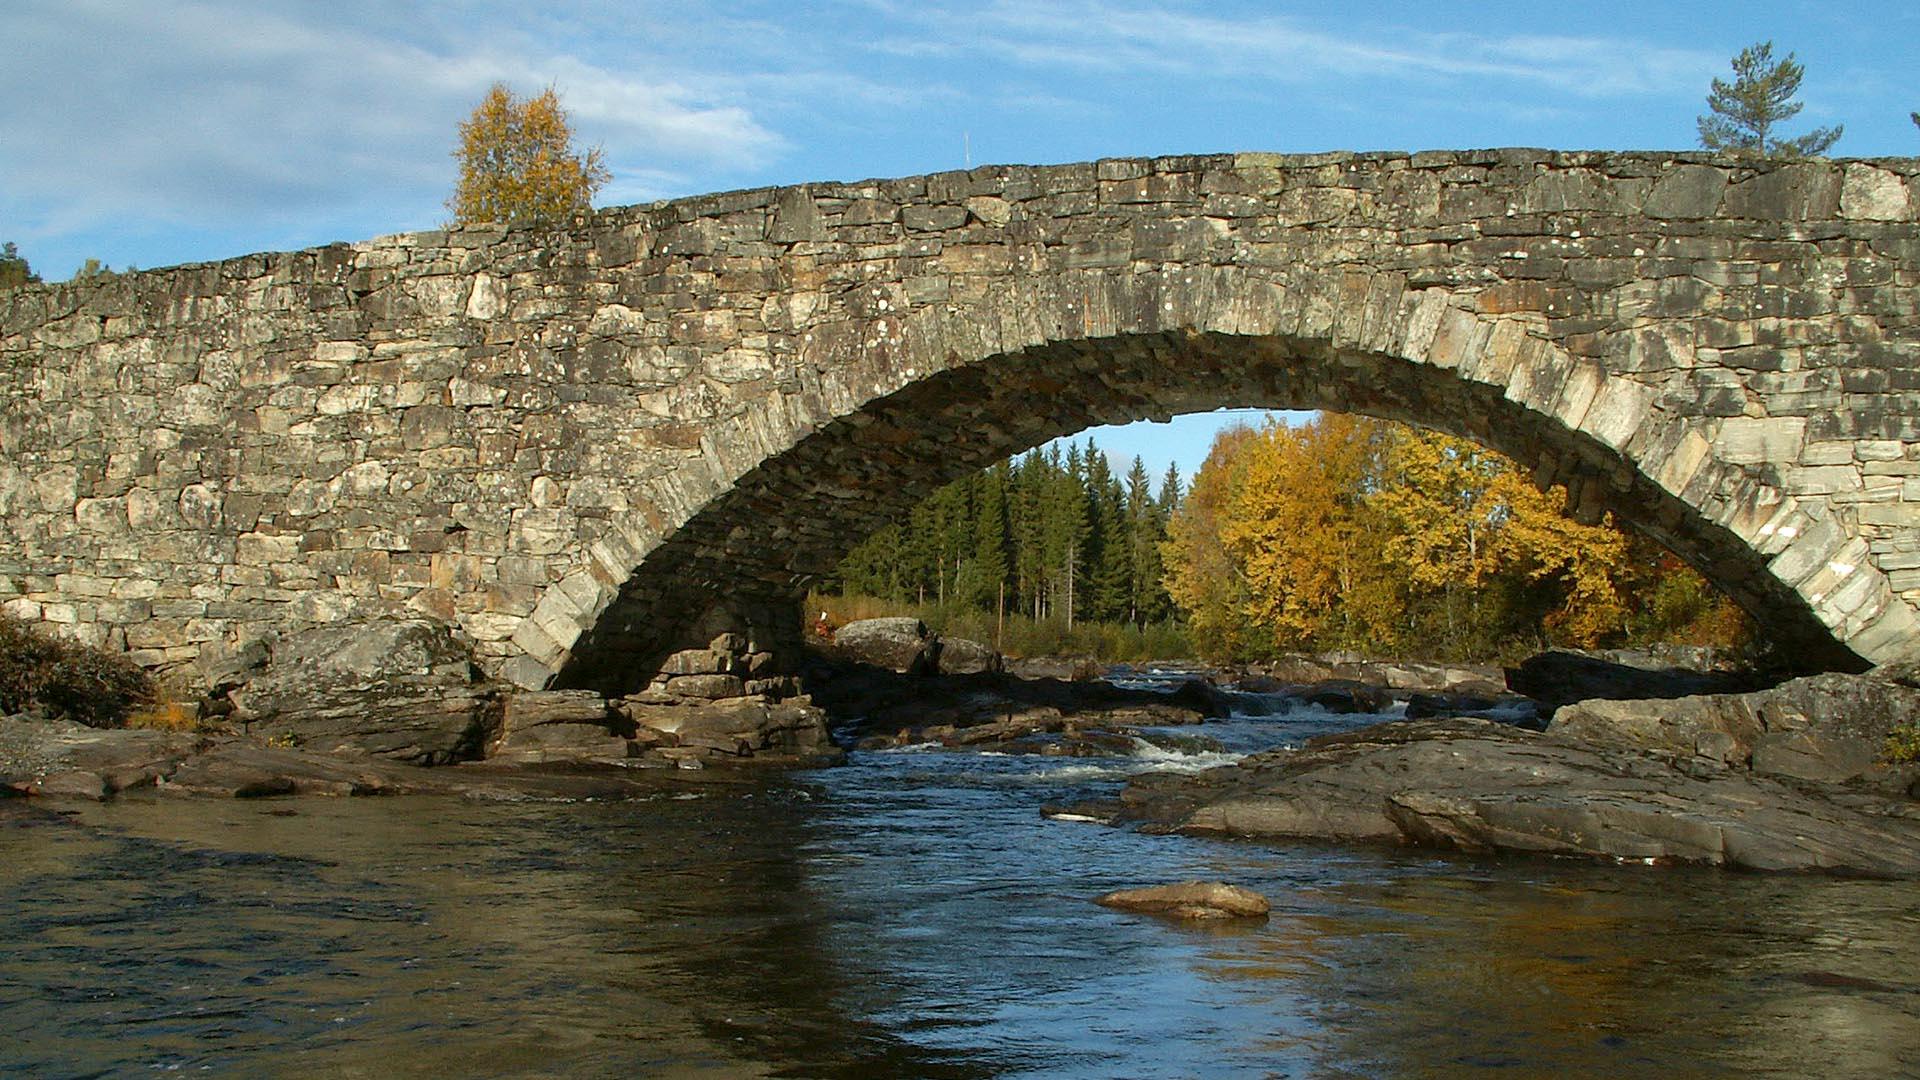 An old stone bridge over a river